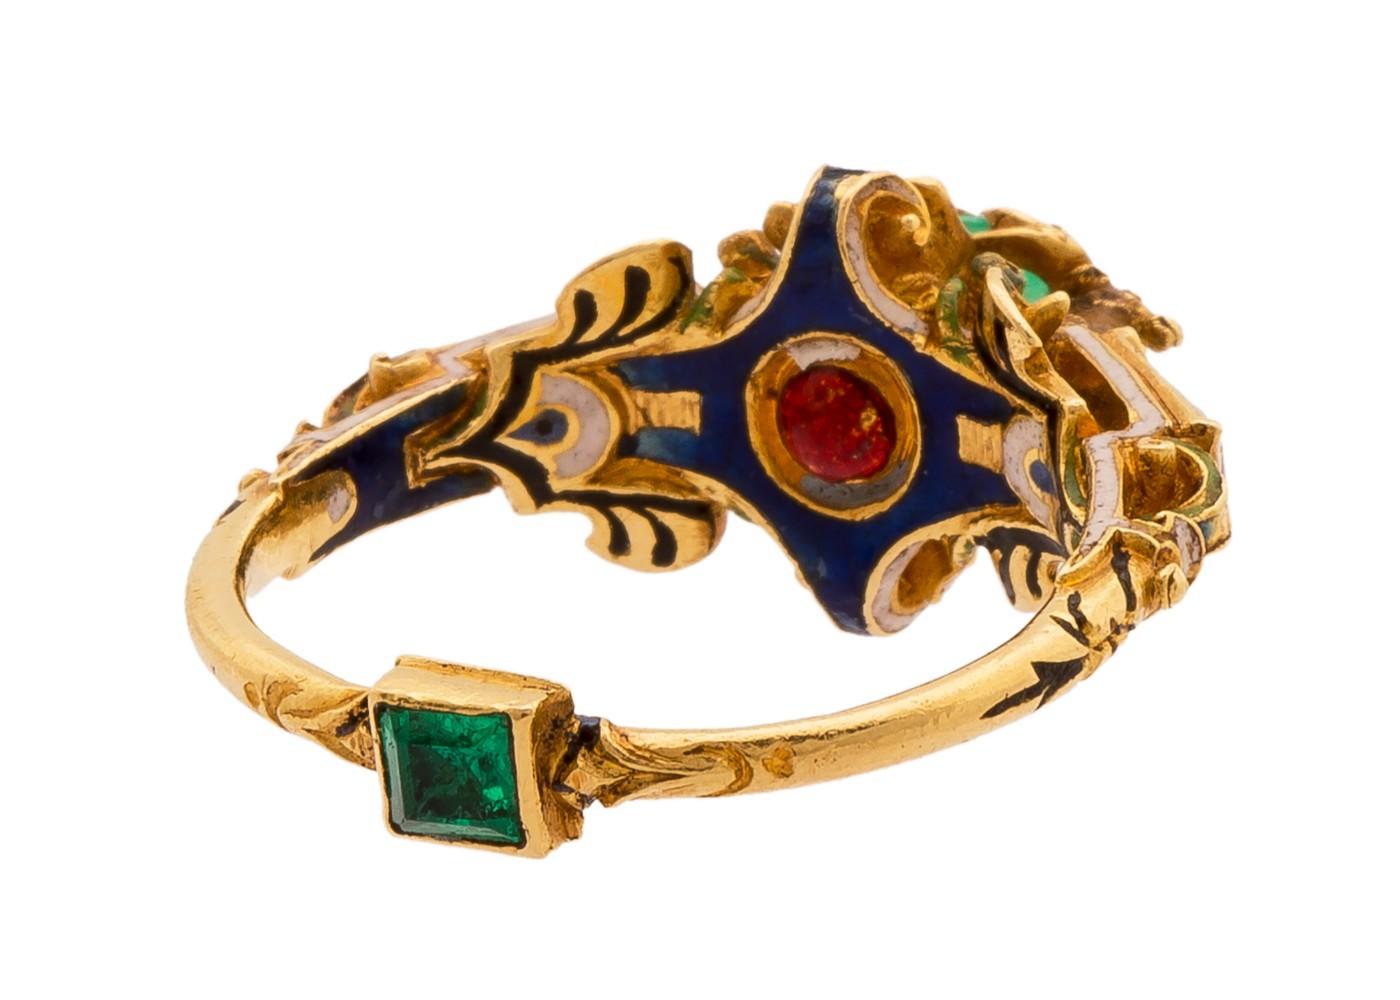 A Monumental Renaissance Gemstone Rong with Two Stags and Exceptional Provenance